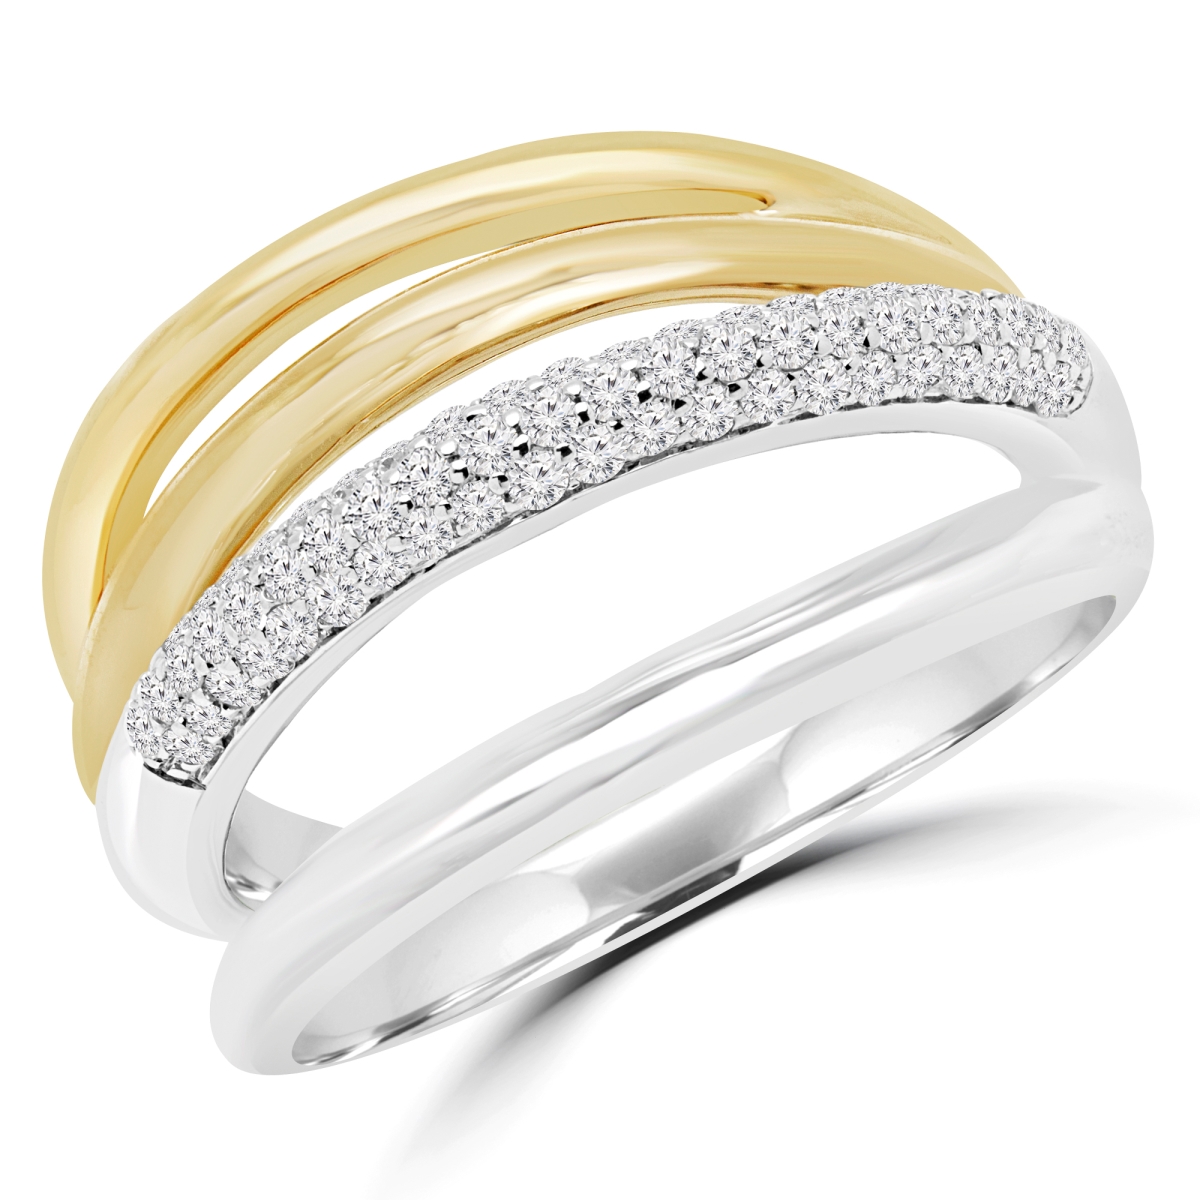 Picture of Majesty Diamonds MDR170050-4 0.37 CTW Round Diamond Cocktail Semi-Eternity Ring in 14K Two-Tone Gold - 4